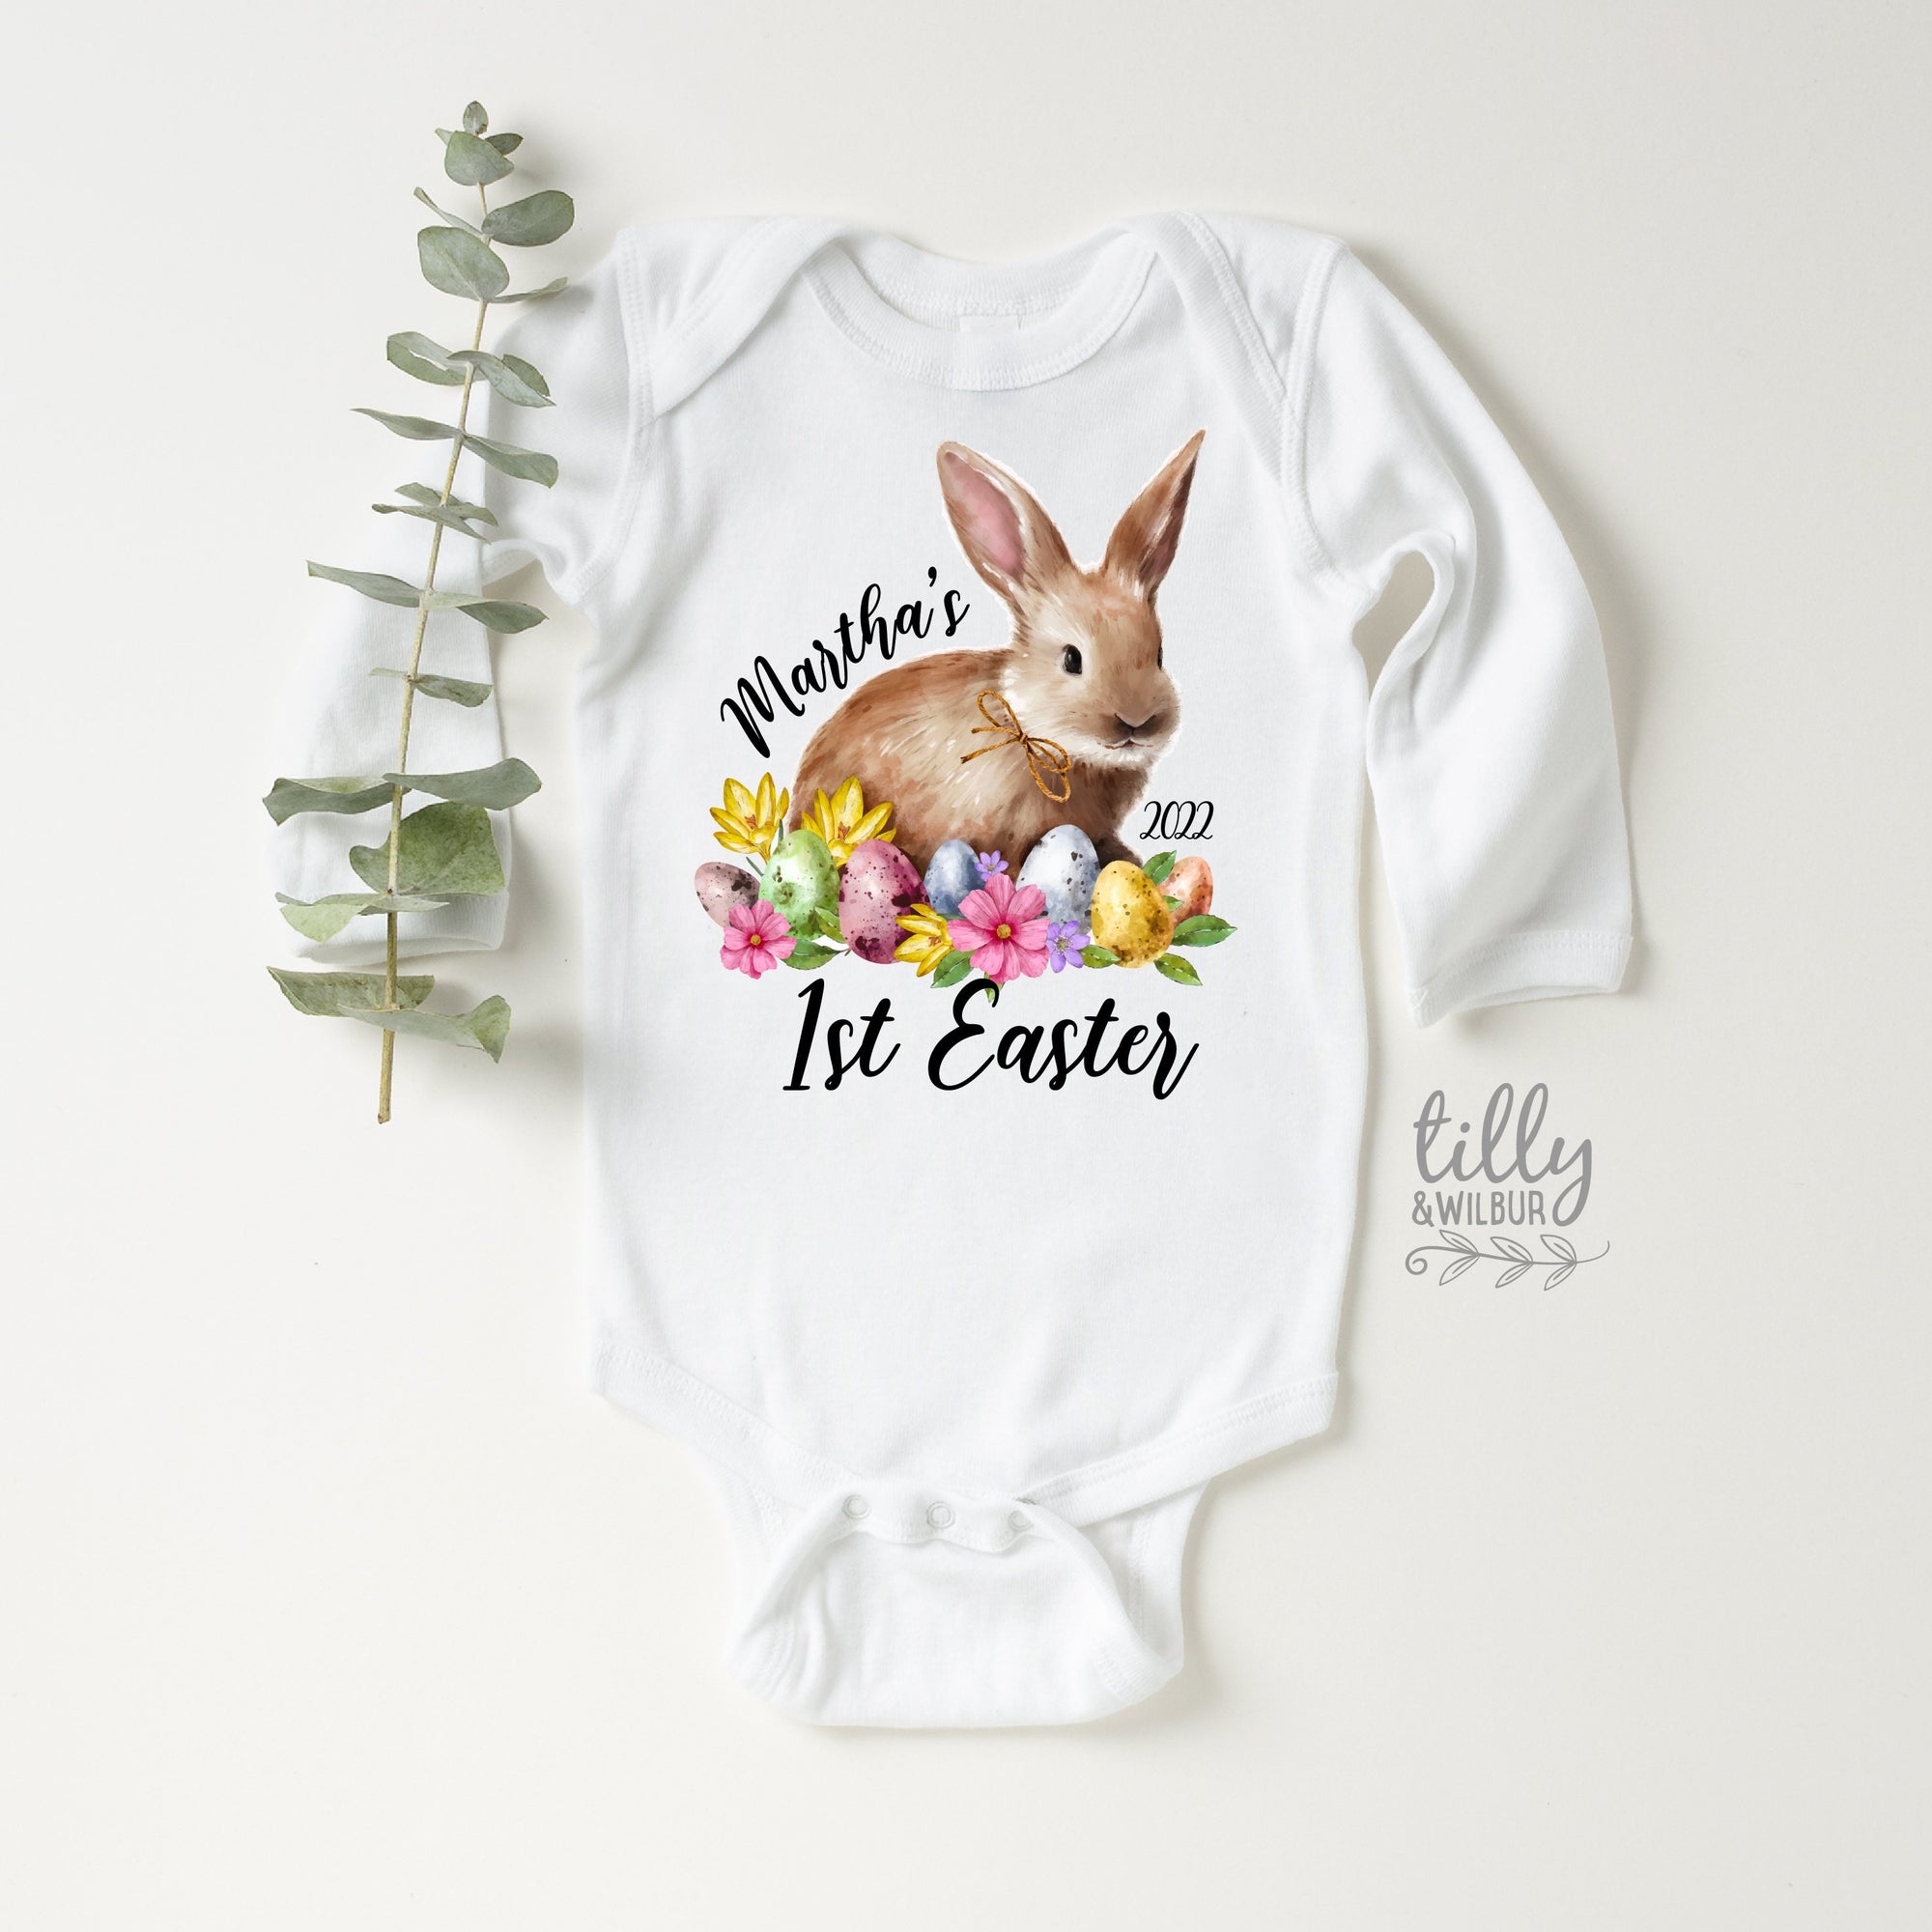 Personalised 1st Easter Baby Bodysuit, First Easter 2022 Baby Bodysuit, Newborn Easter Gift, 1st Easter Outfit, Baby's 1st Easter Onesie